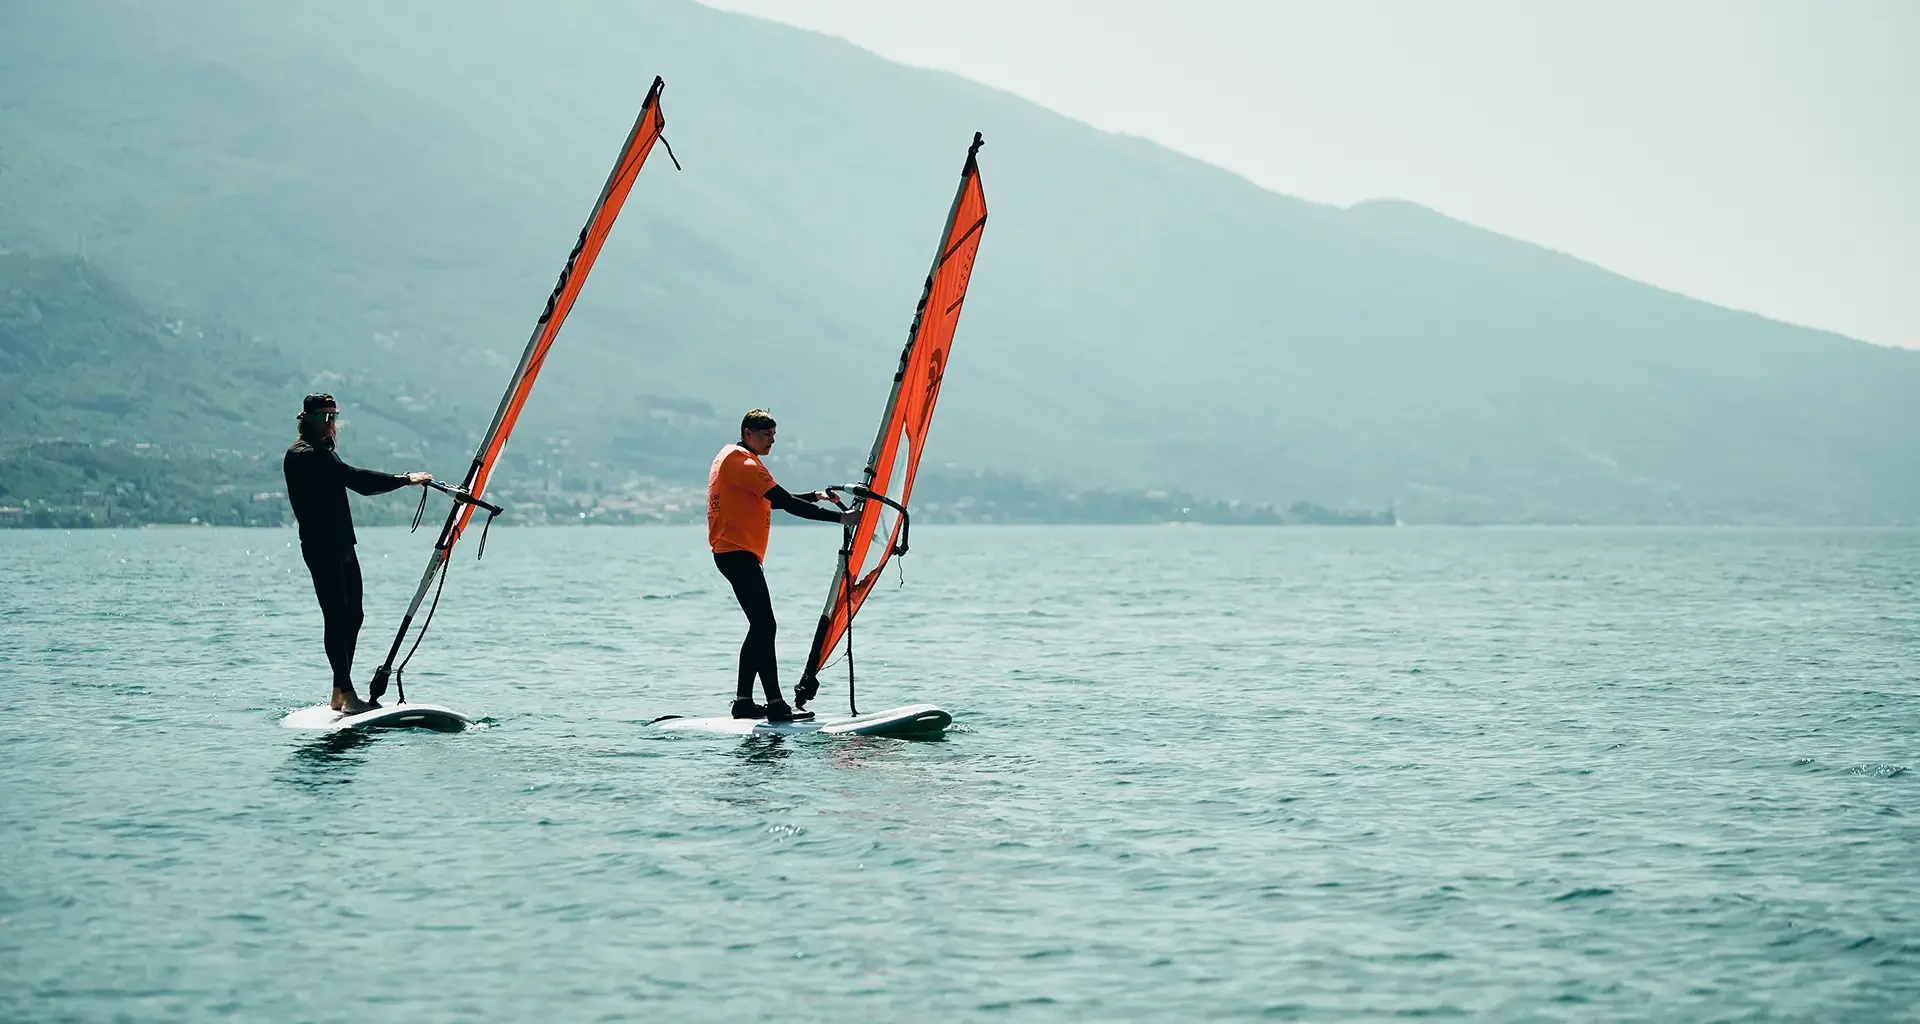 two windsurfers with red sails riding in low wind